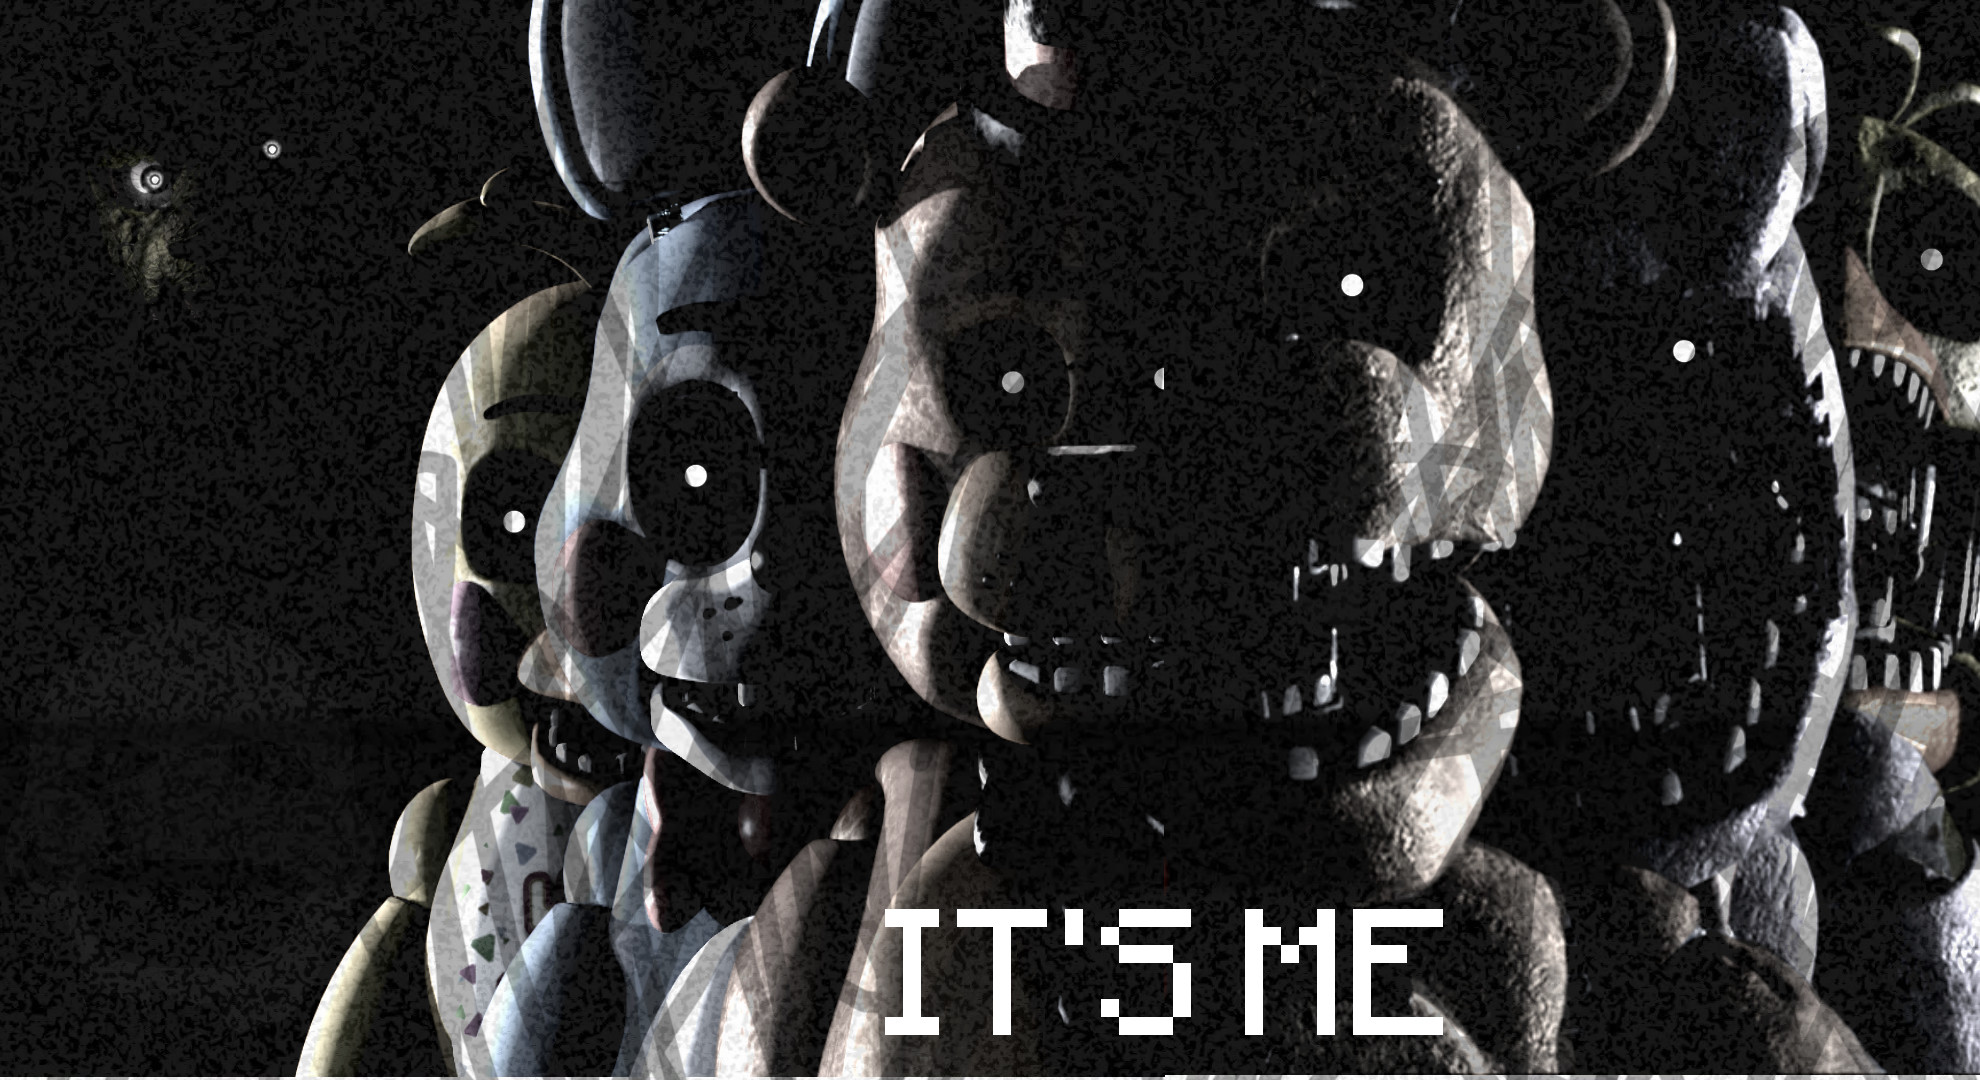 1980x1080 Recommended: FNAF Pictures 29/11/2016, Cara Mckenny